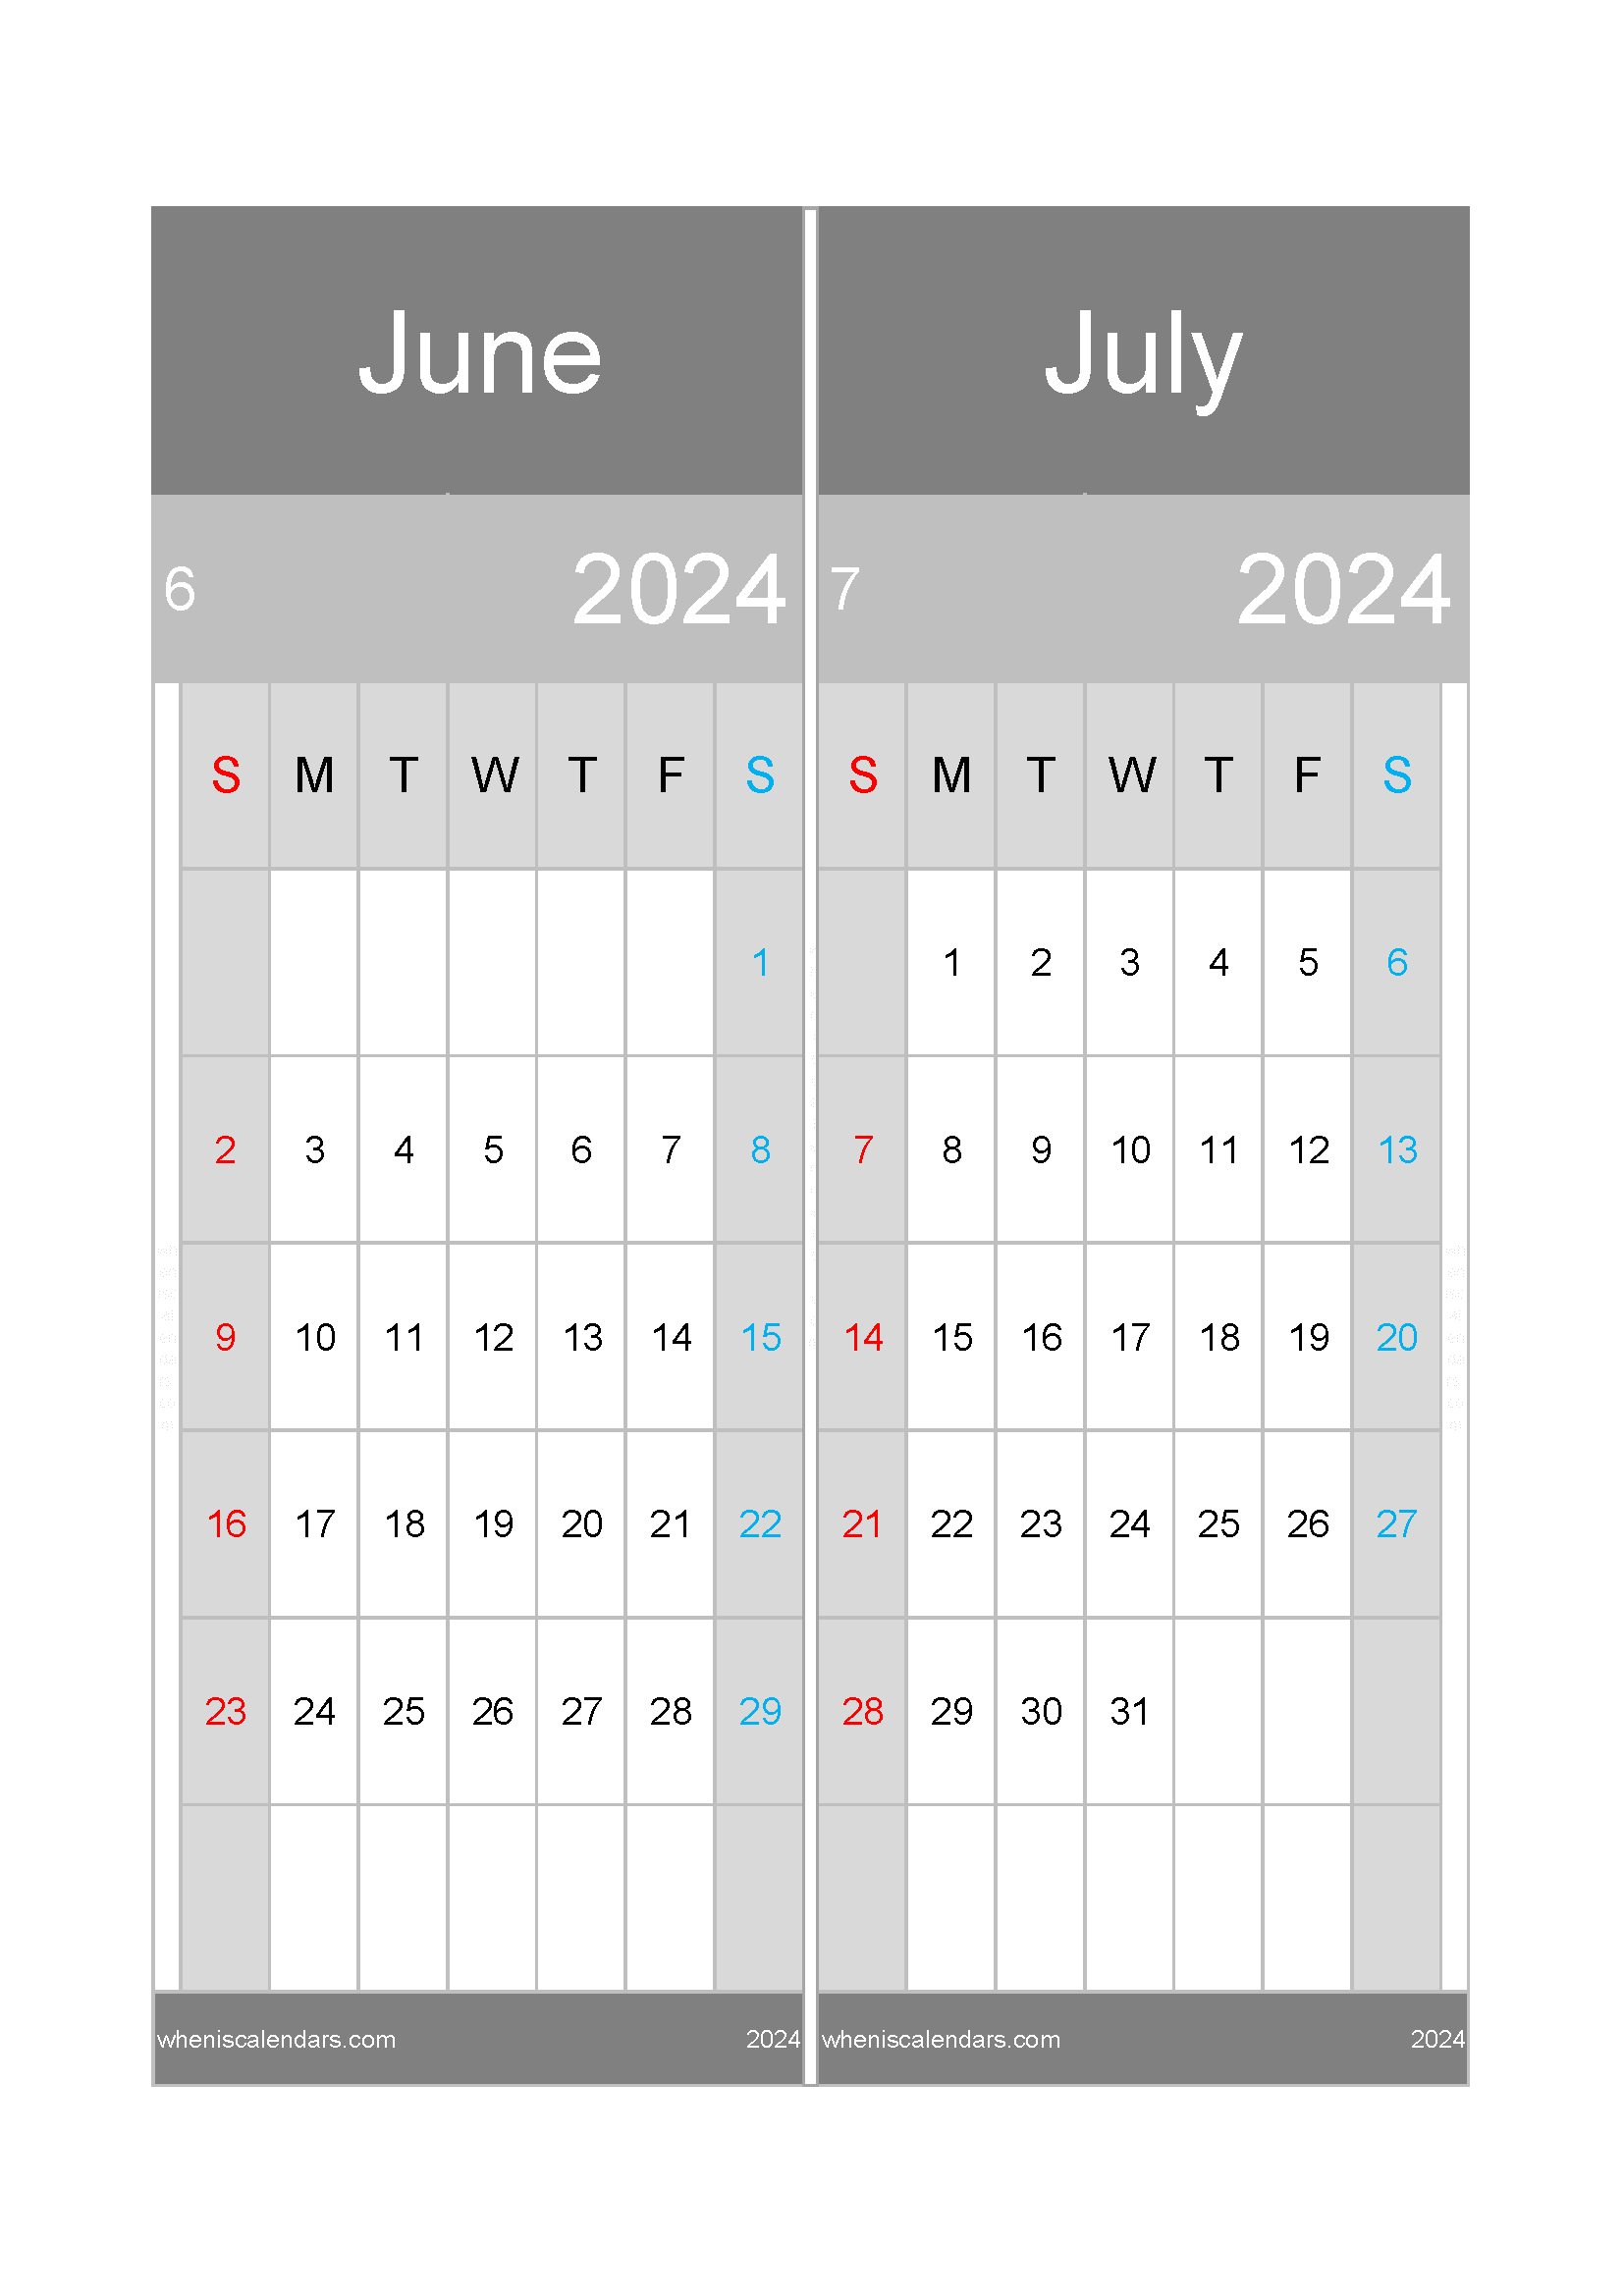 Download calendar for the month of June and July 2024 A4 JJ242047